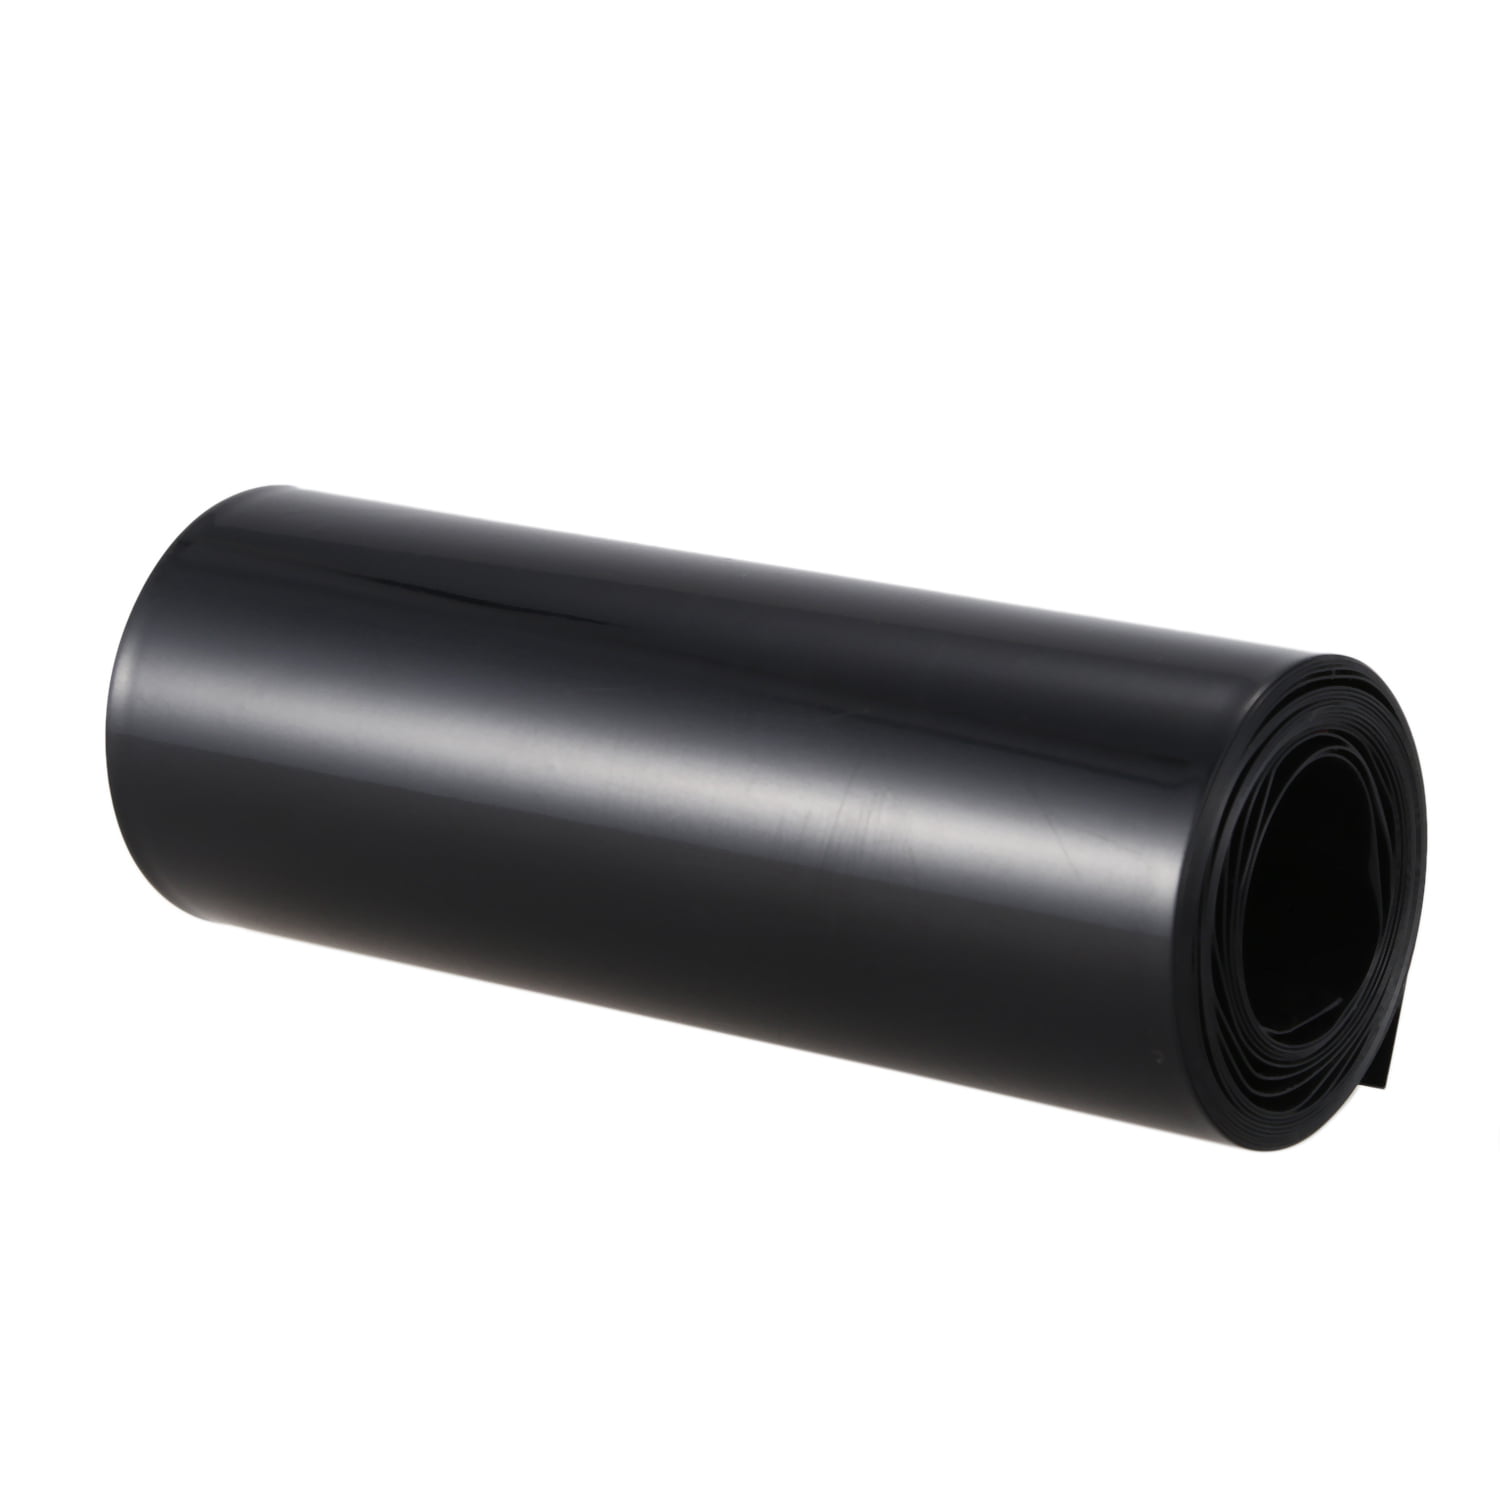 Details about  / PVC Heat Shrink Tubing 29.5-50 mm Wrap RC Battery LiPO NiMH NiCd Colour Select